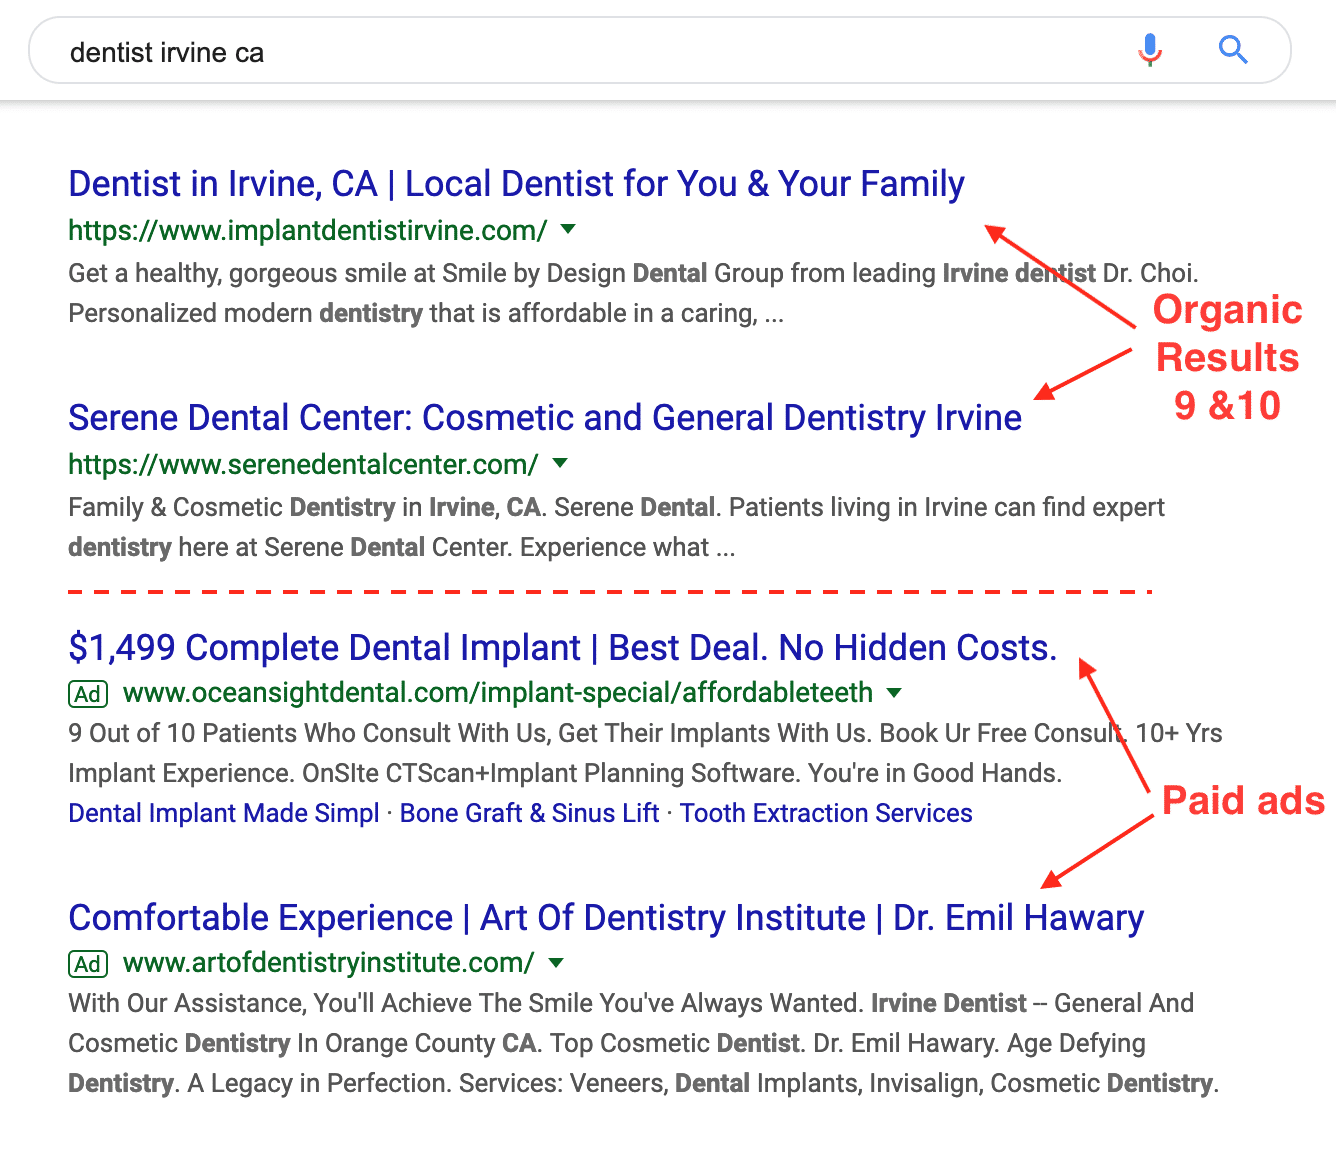 screenshot of google image results showing paid ads at the bottom of results